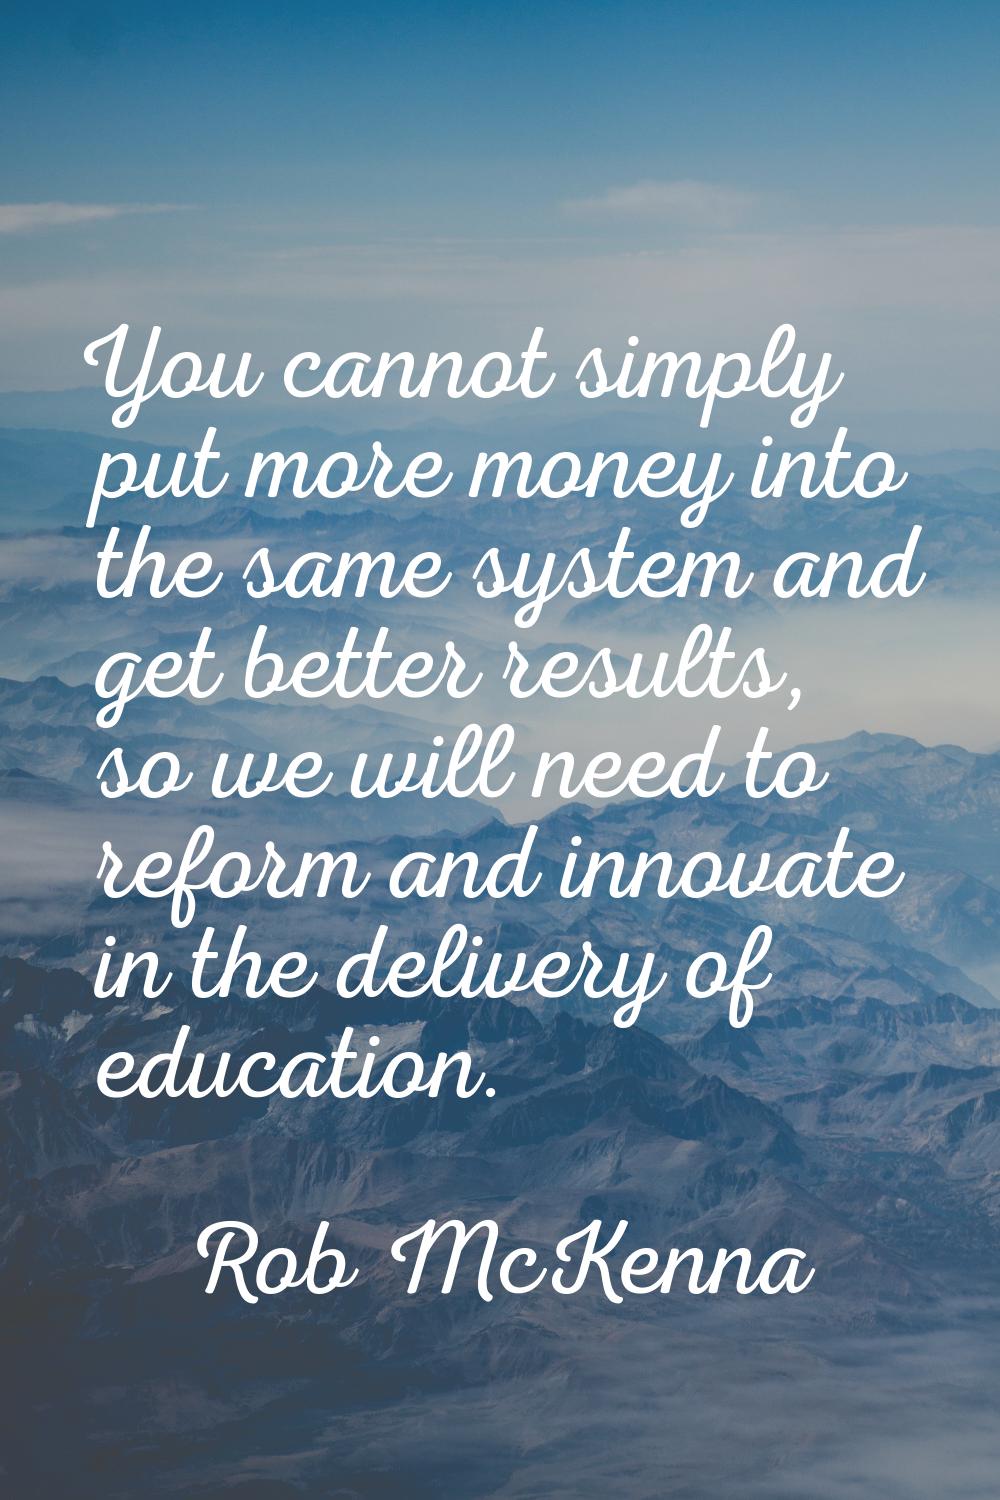 You cannot simply put more money into the same system and get better results, so we will need to re